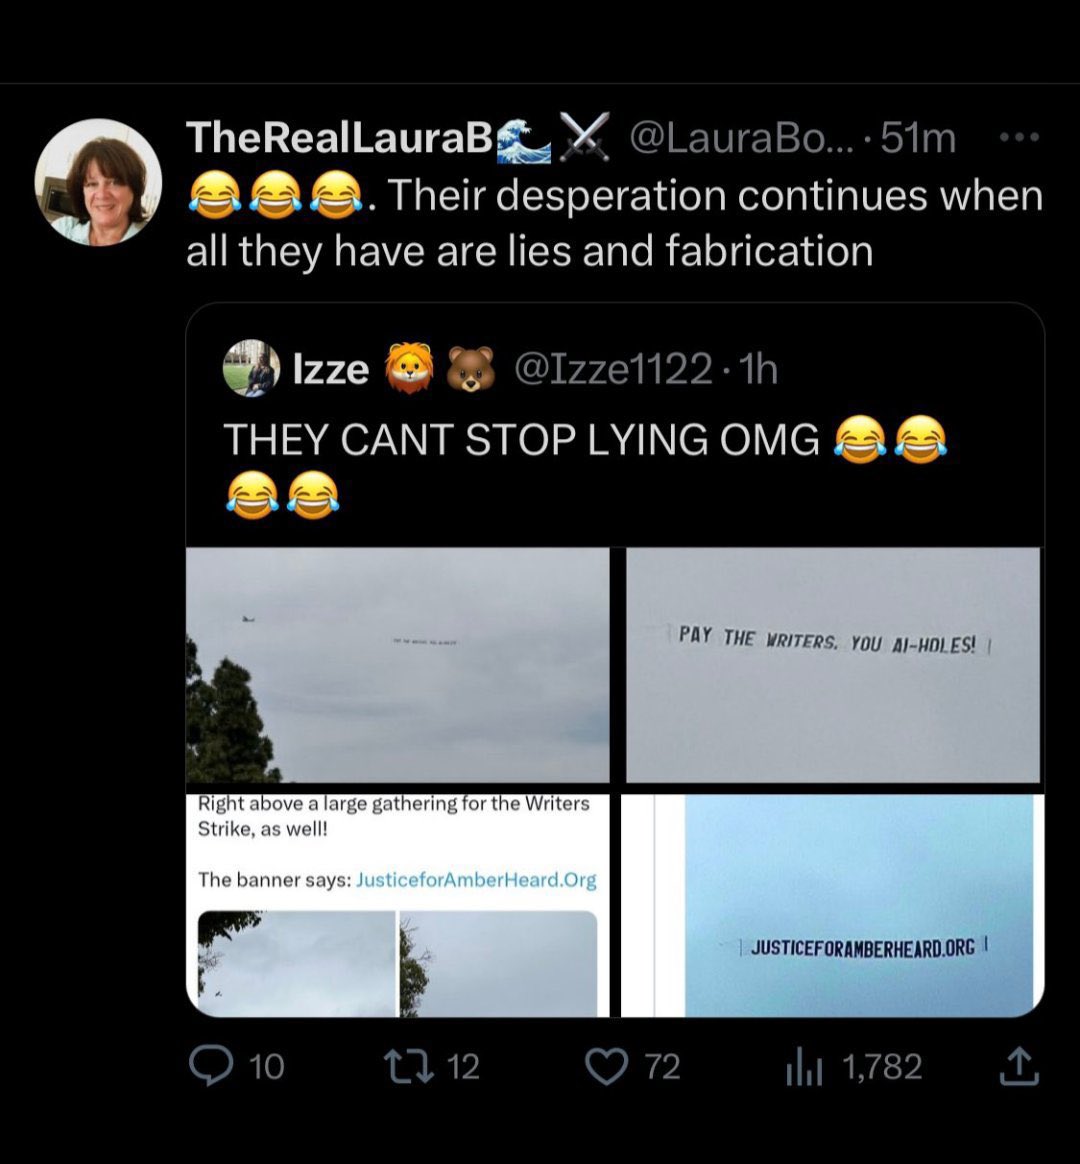 Johnny Depp fans have been fed so much misinformation that it has altered their brains into viewing everything as a conspiracy. They’re trying to prove the banner was fake like those planes can’t be hired by anyone to say custom things 😭 it’s giving qanon levels of delusion